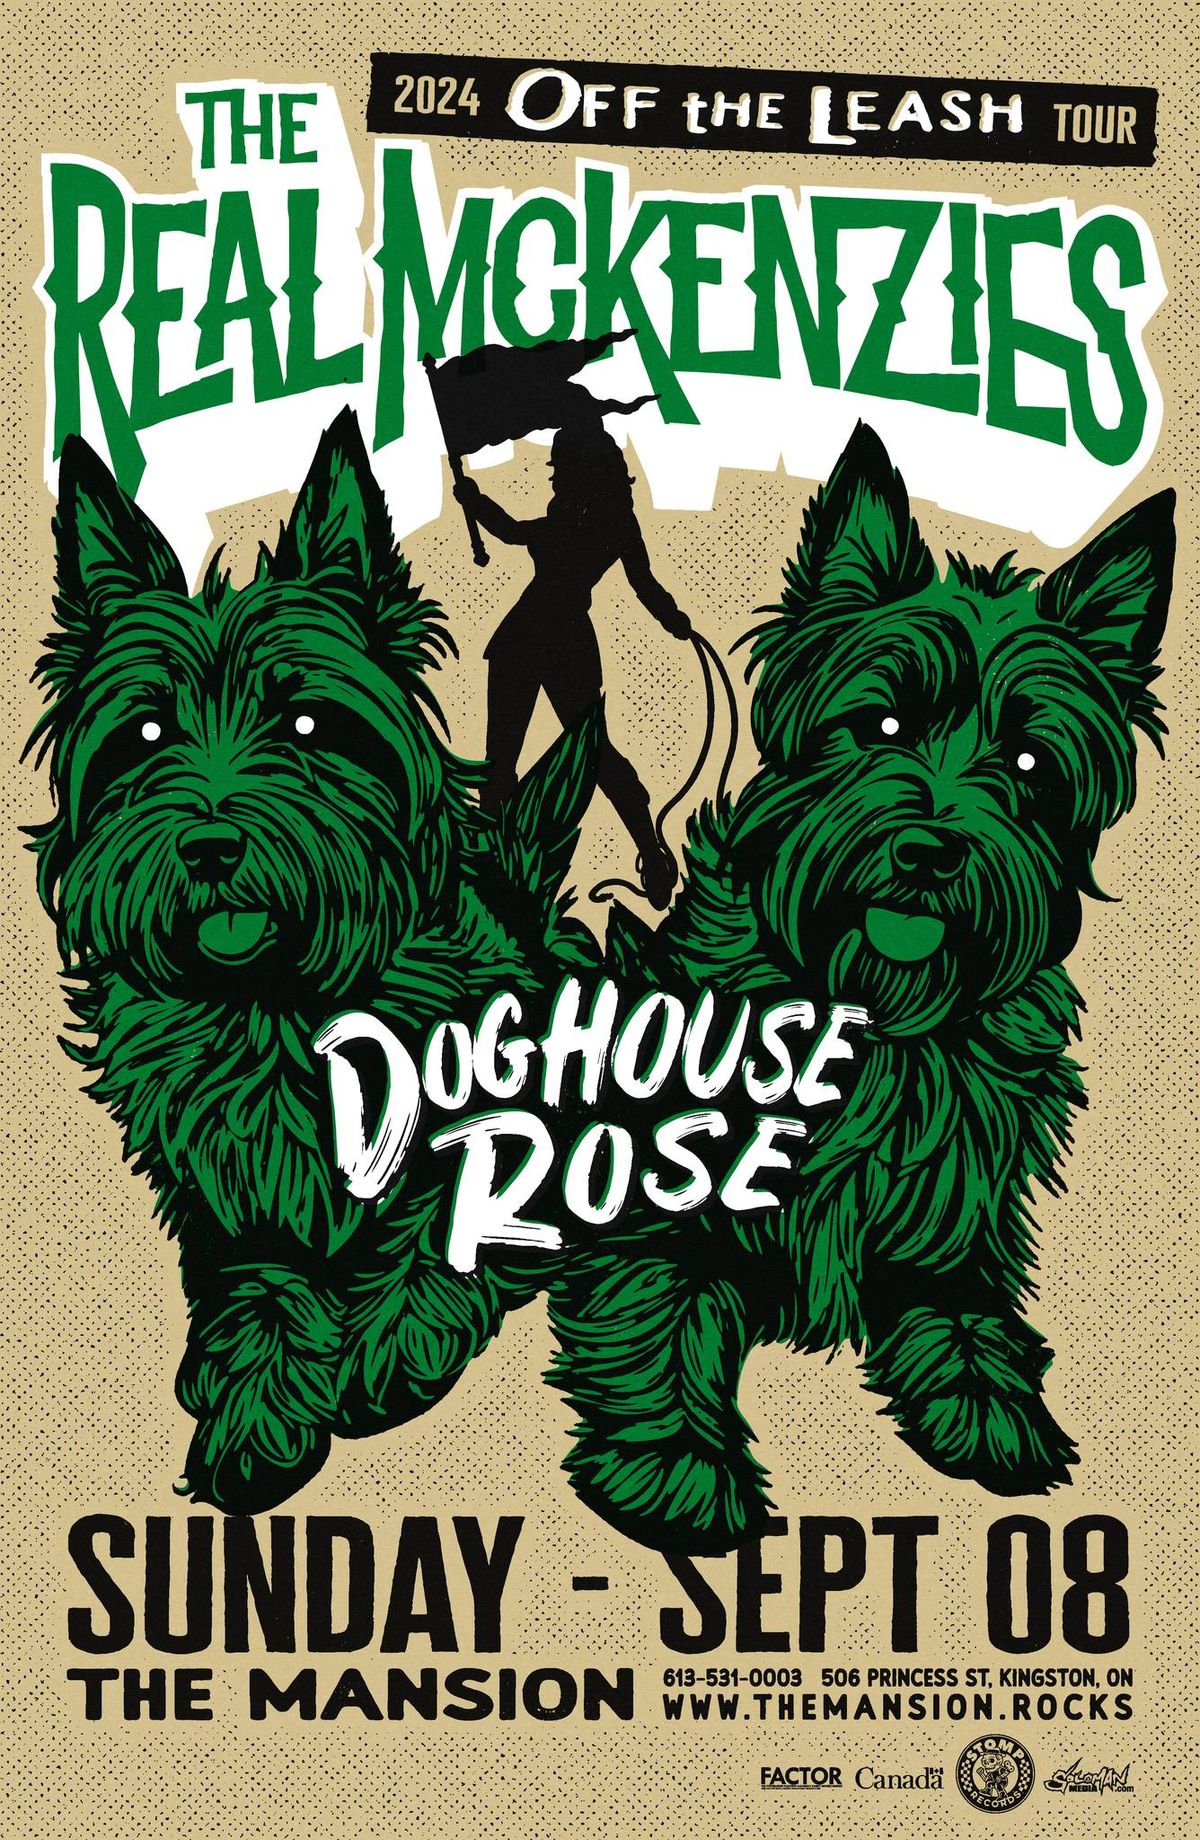 The Real Mckenzies, Doghouse Rose & more at The Mansion 